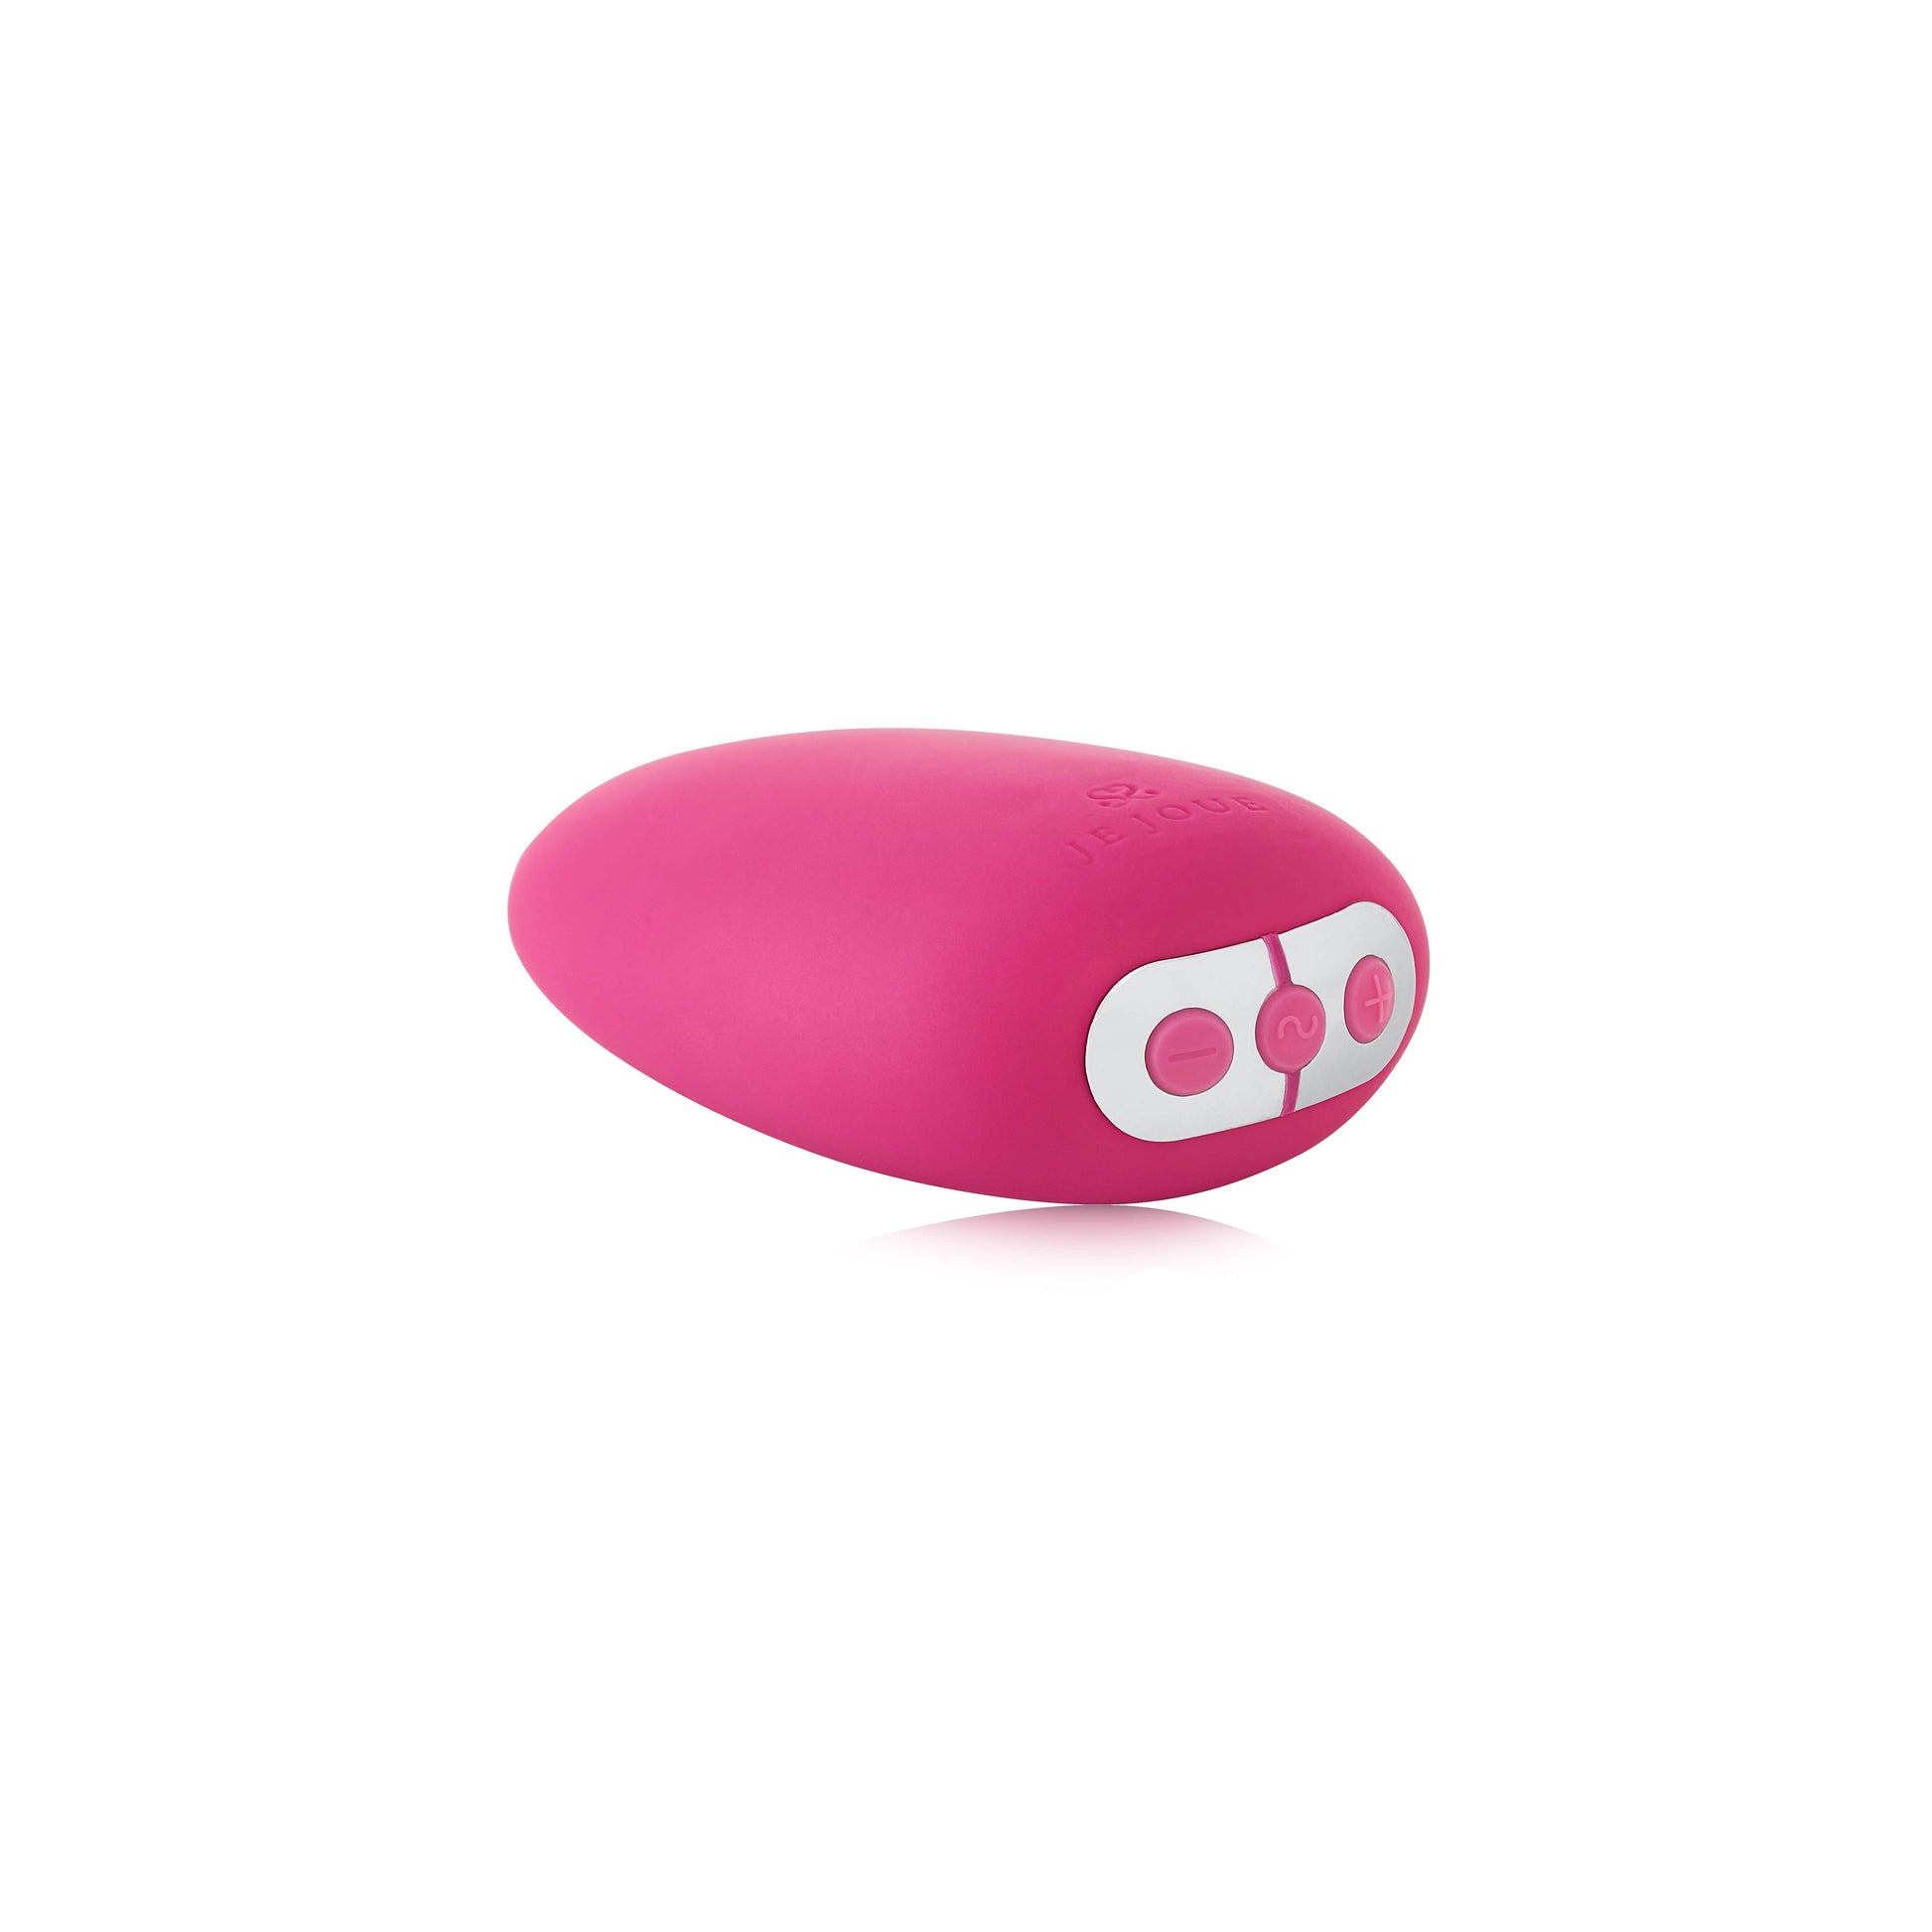 Mimi Vibrator in pink button view 